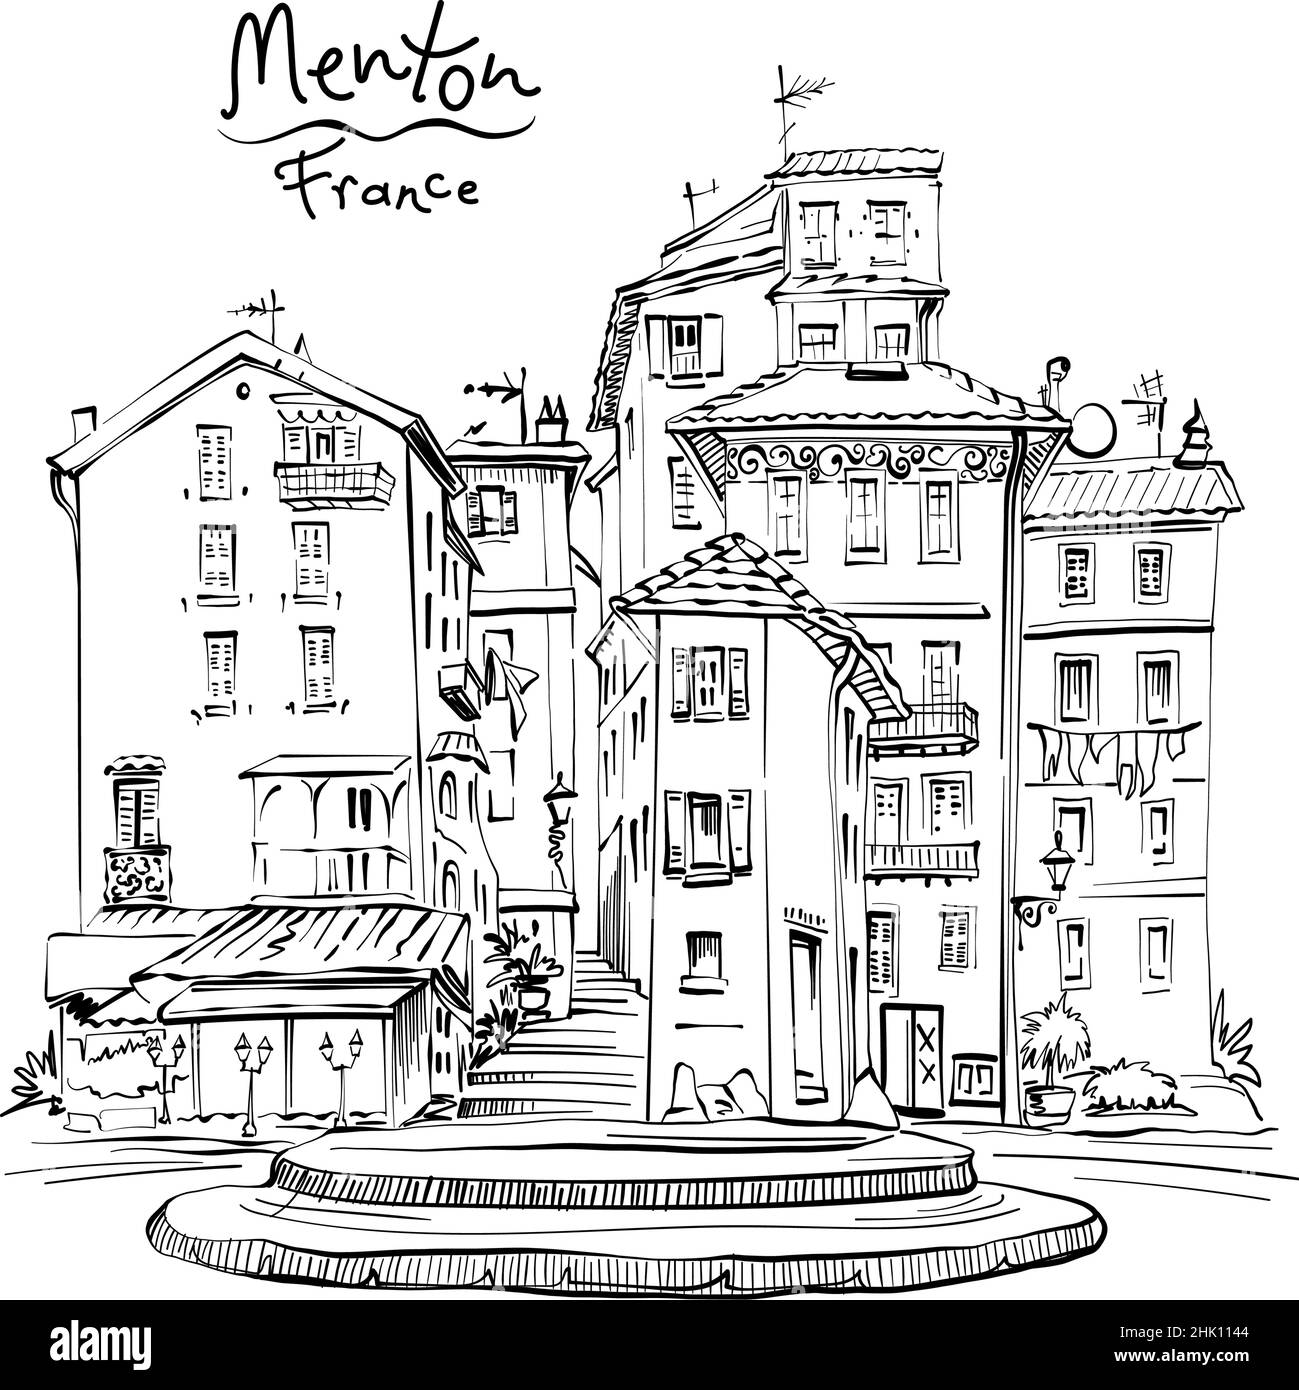 Vector hand drawing. Typical Provencal houses in Menton, Provence, France Stock Vector